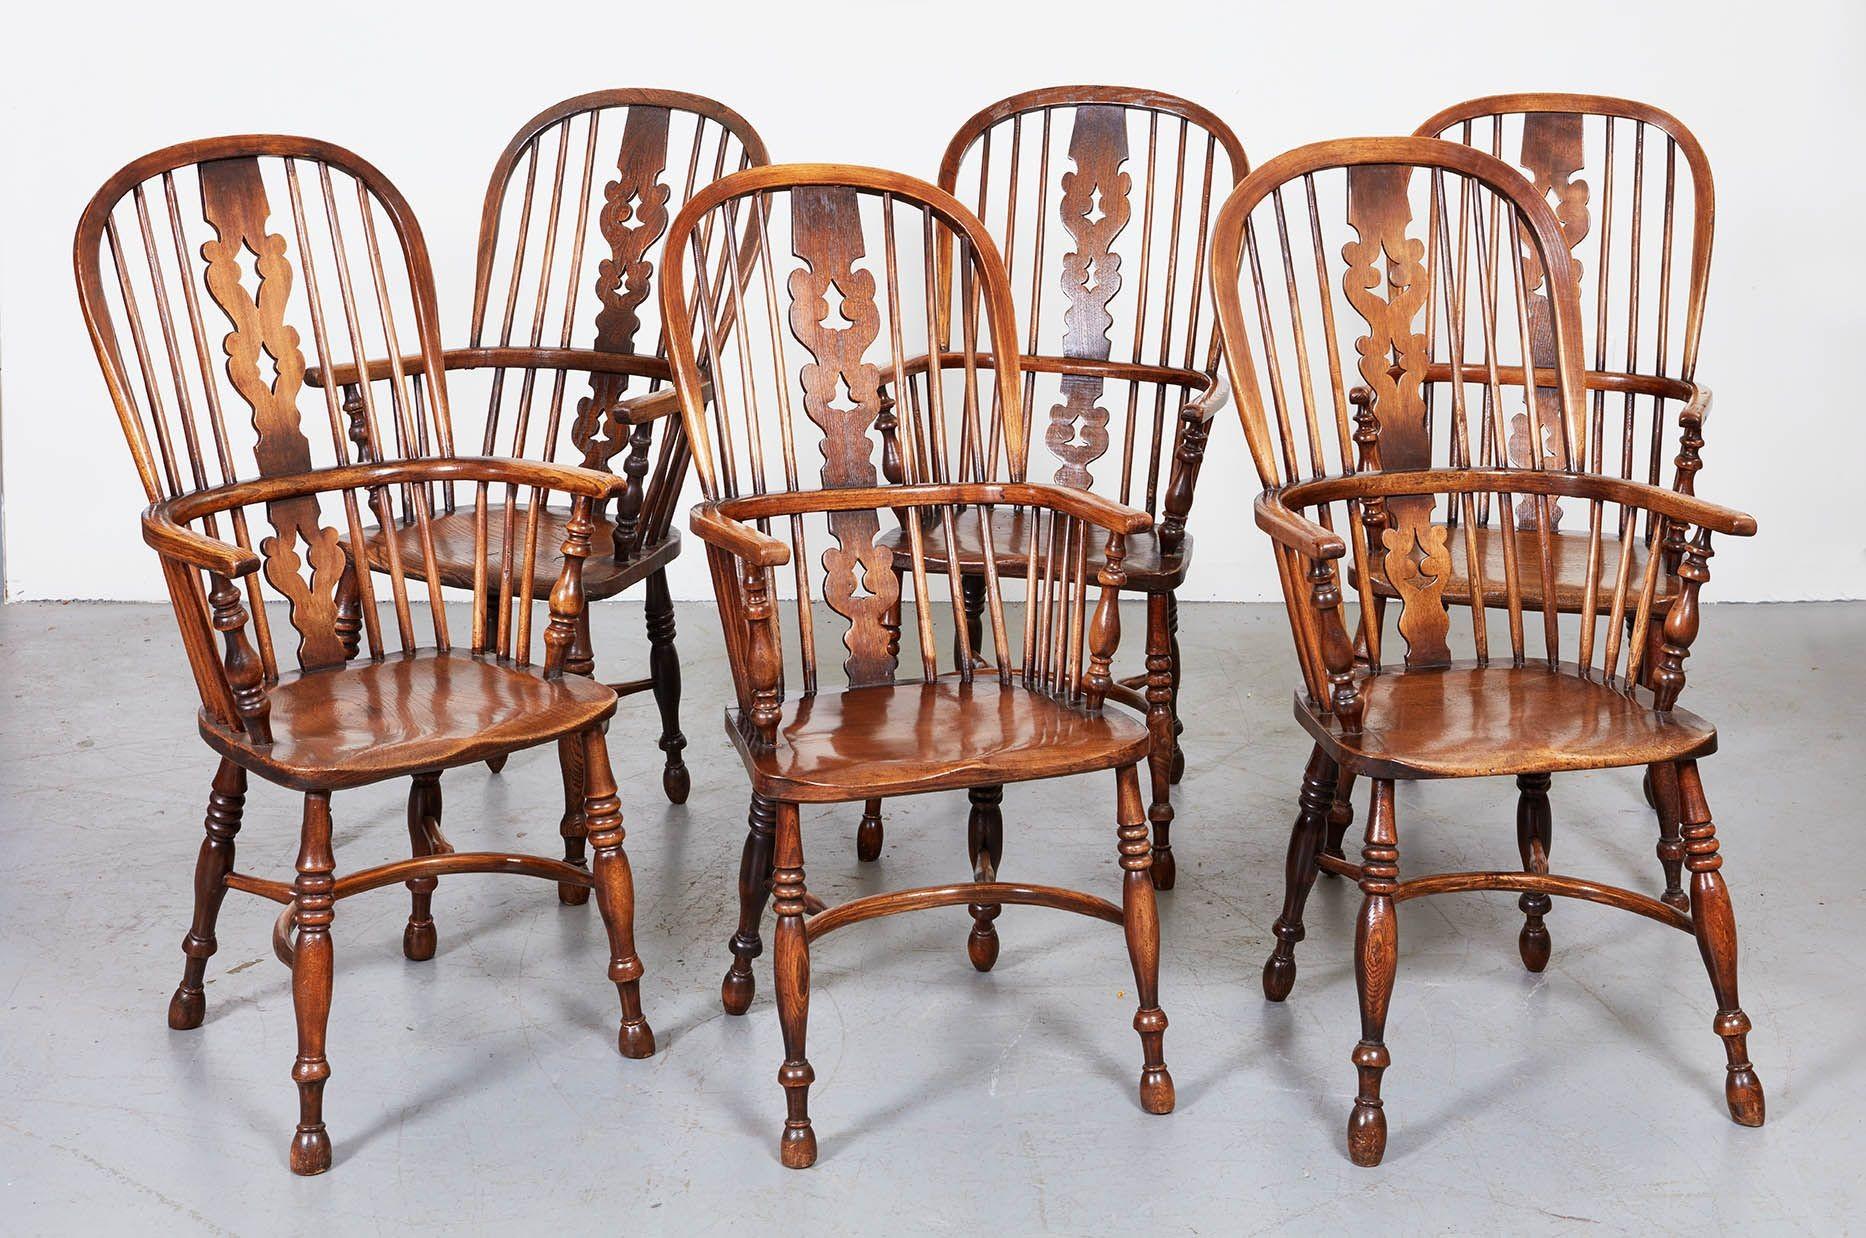 Six windsor armchairs having arched backs and single piece continuous arms, pierced backsplat and spindles socketed into plank seat, and standing on turned legs joined by curved crinoline stretchers. English, mid 19th century. Sturdy and